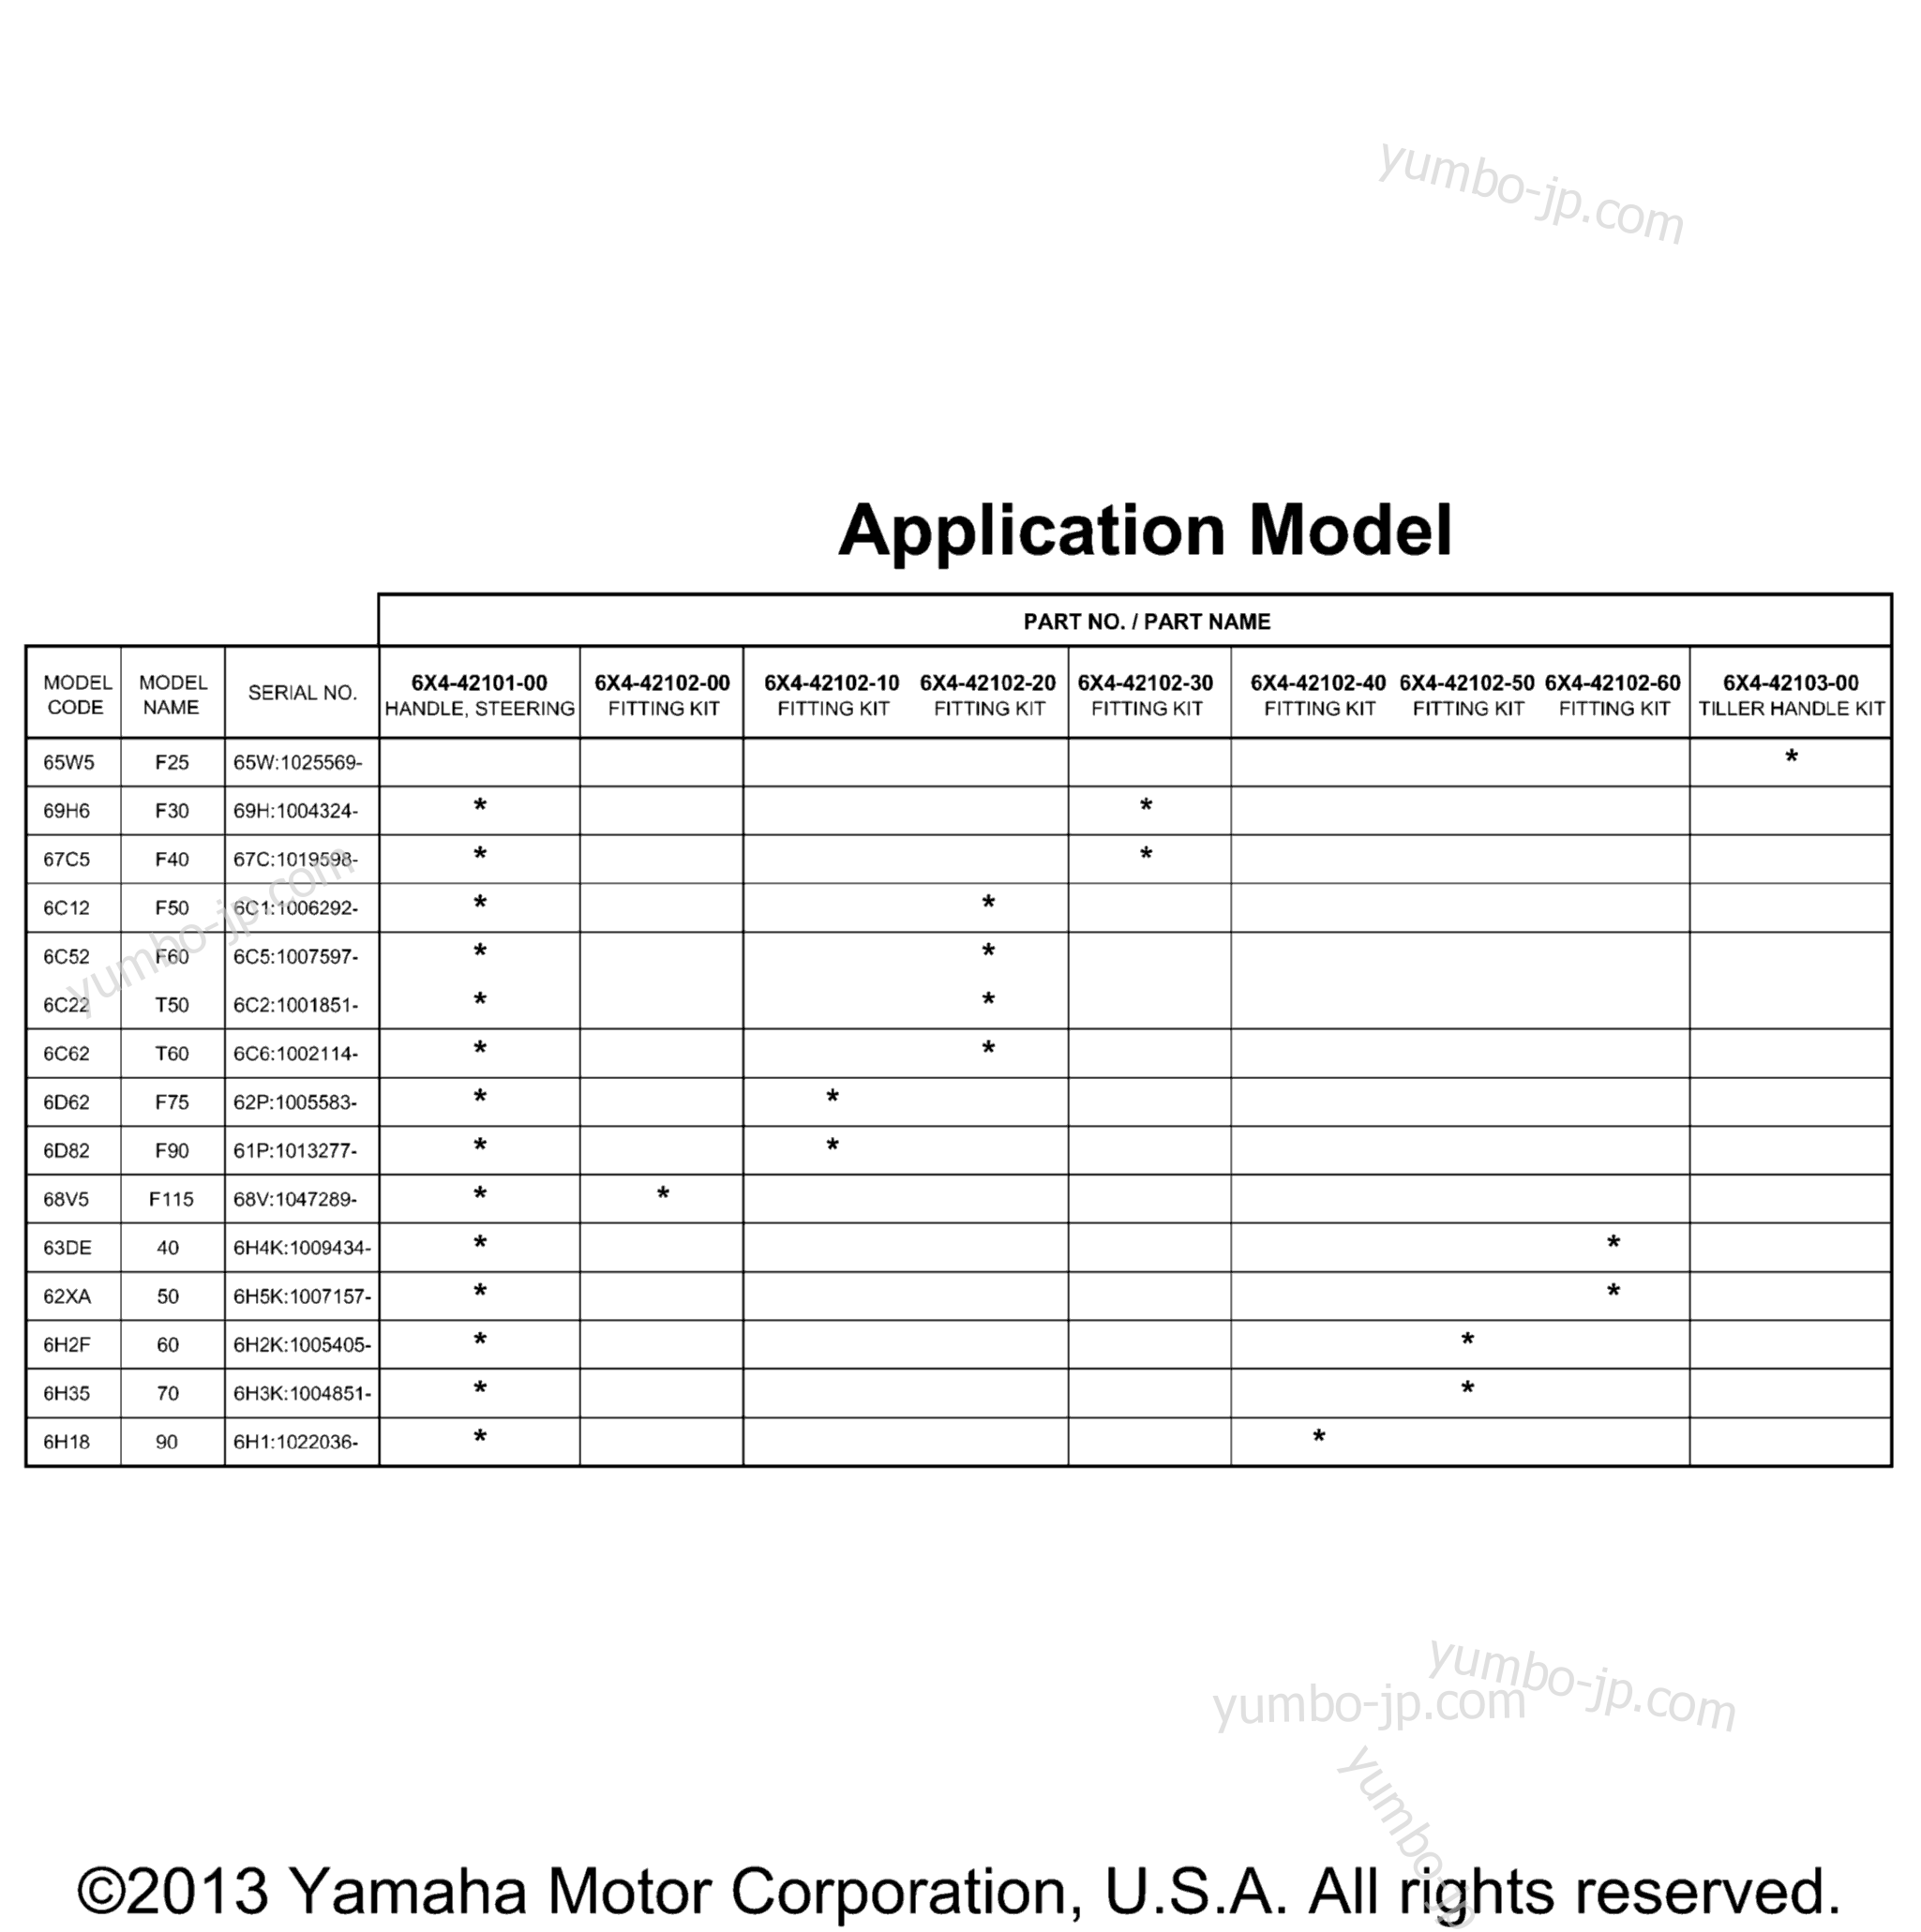 Tiller Application Chart for outboards YAMAHA RIGGING 20 (0405) PARTS 2006 RIGGING PARTS BREAKDOWN 2006 year